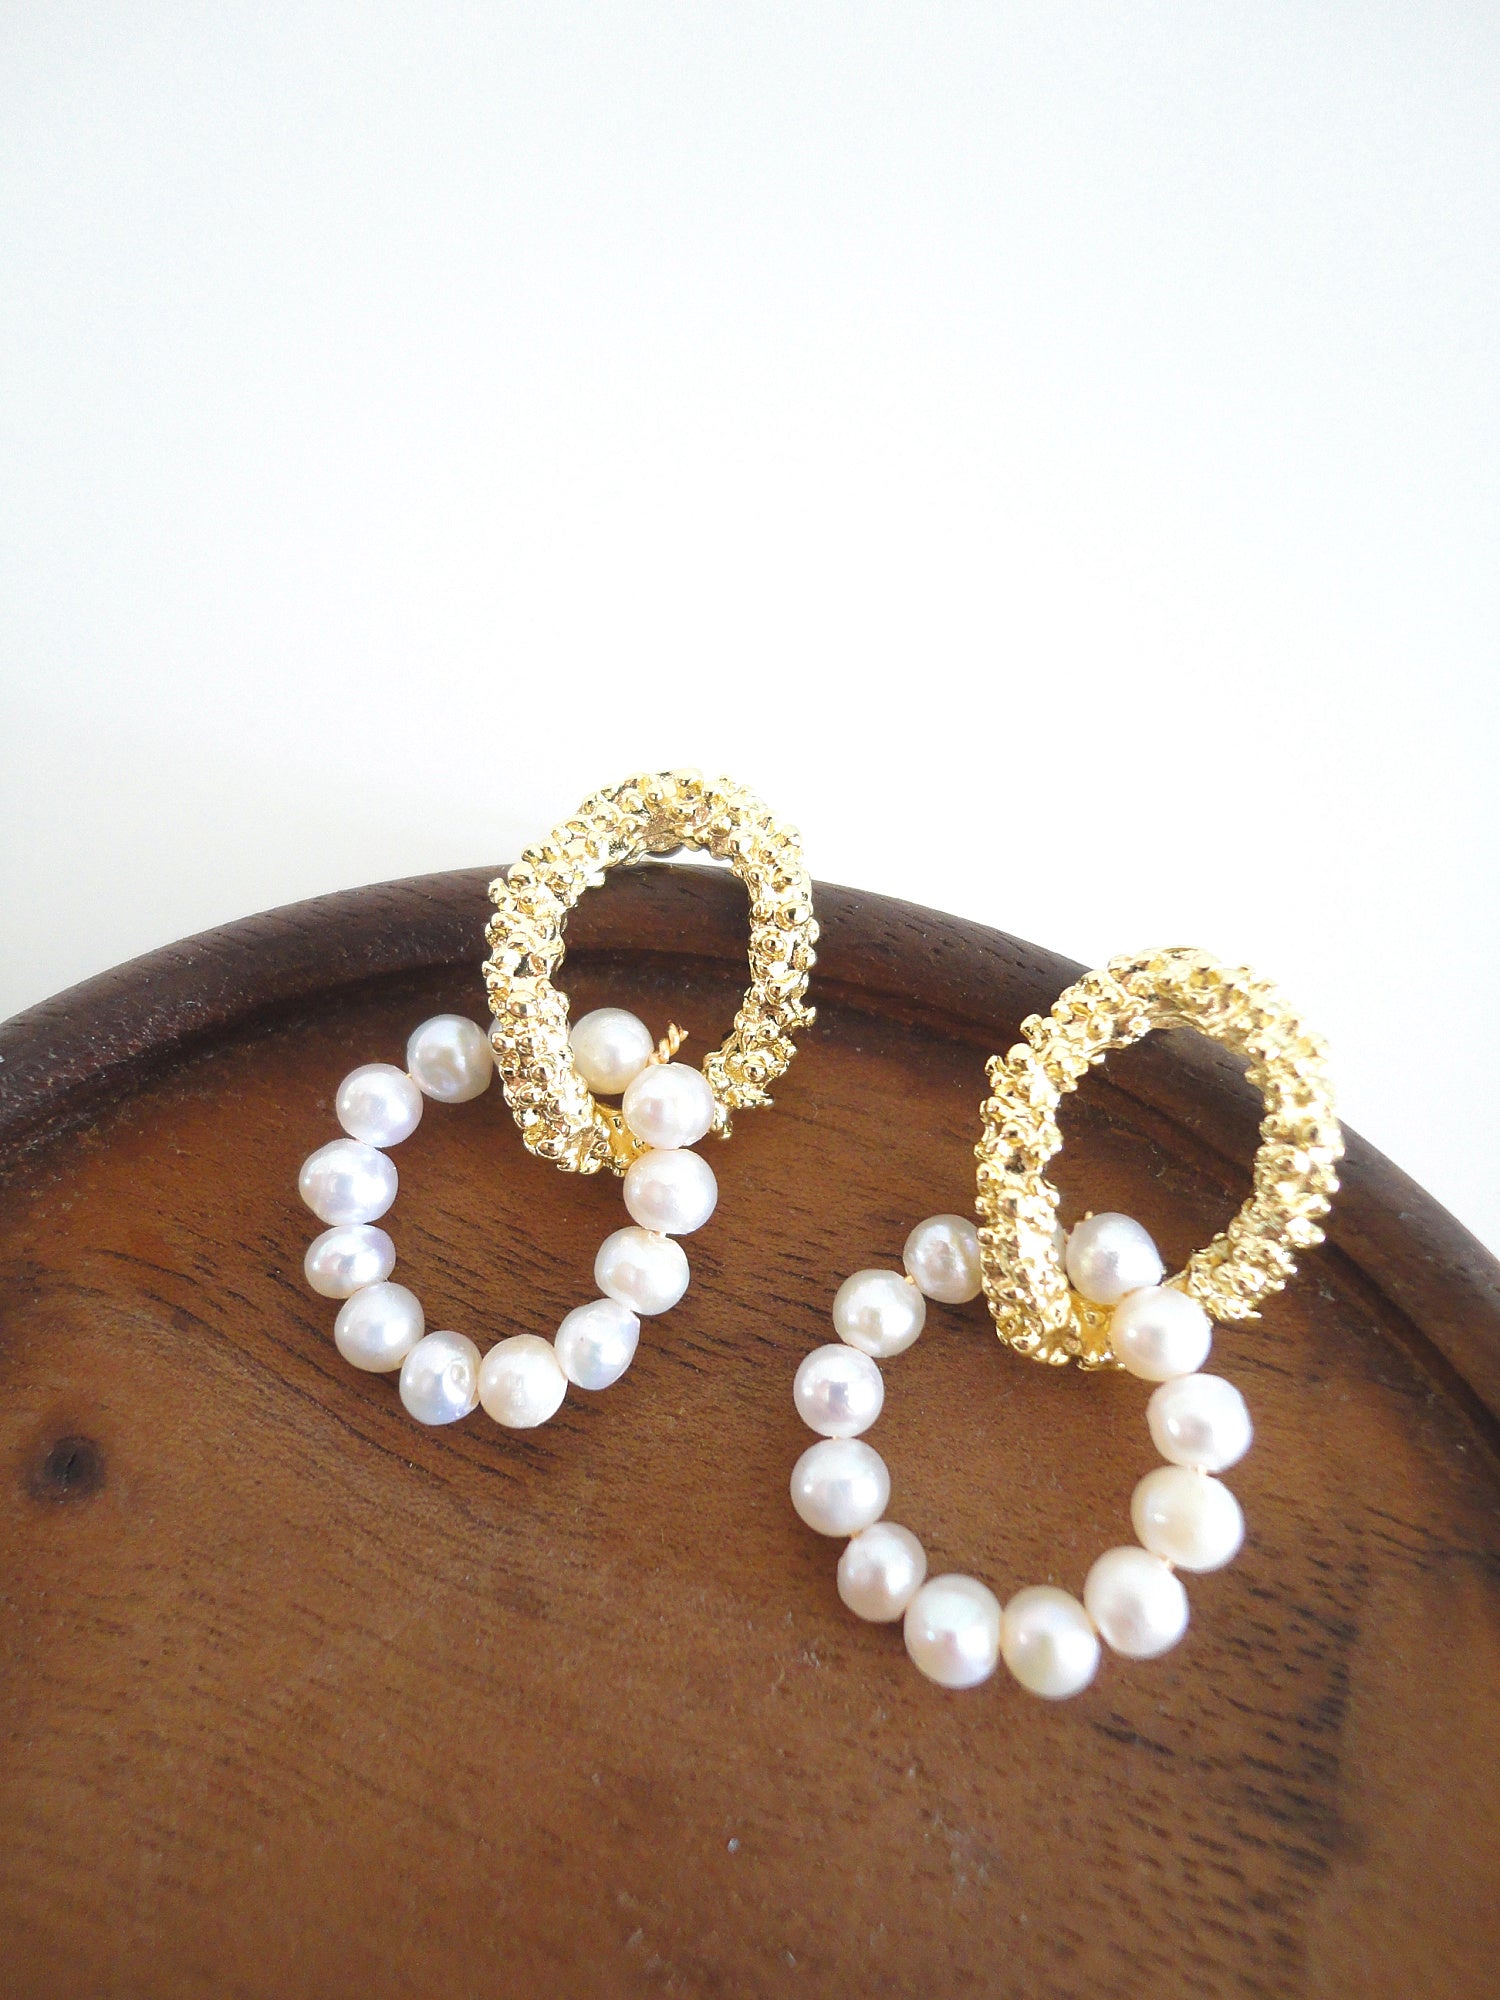 Golden Textured with Freshwater Pearl Stud Earrings